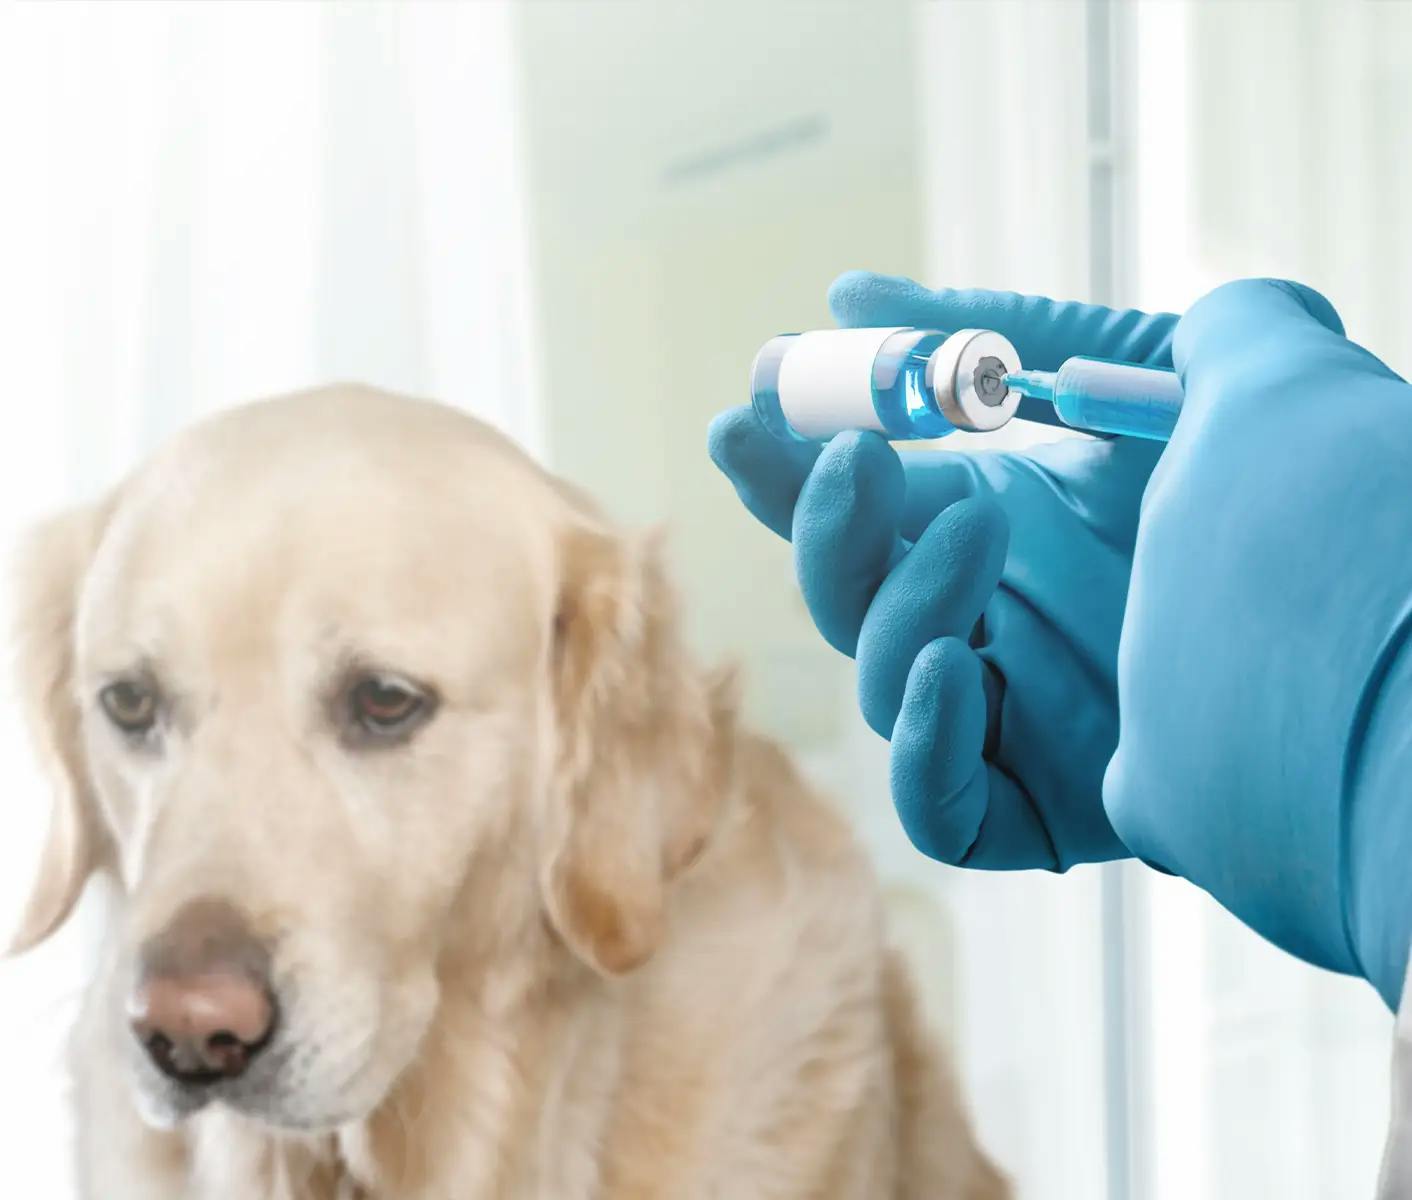 dog getting a vaccination